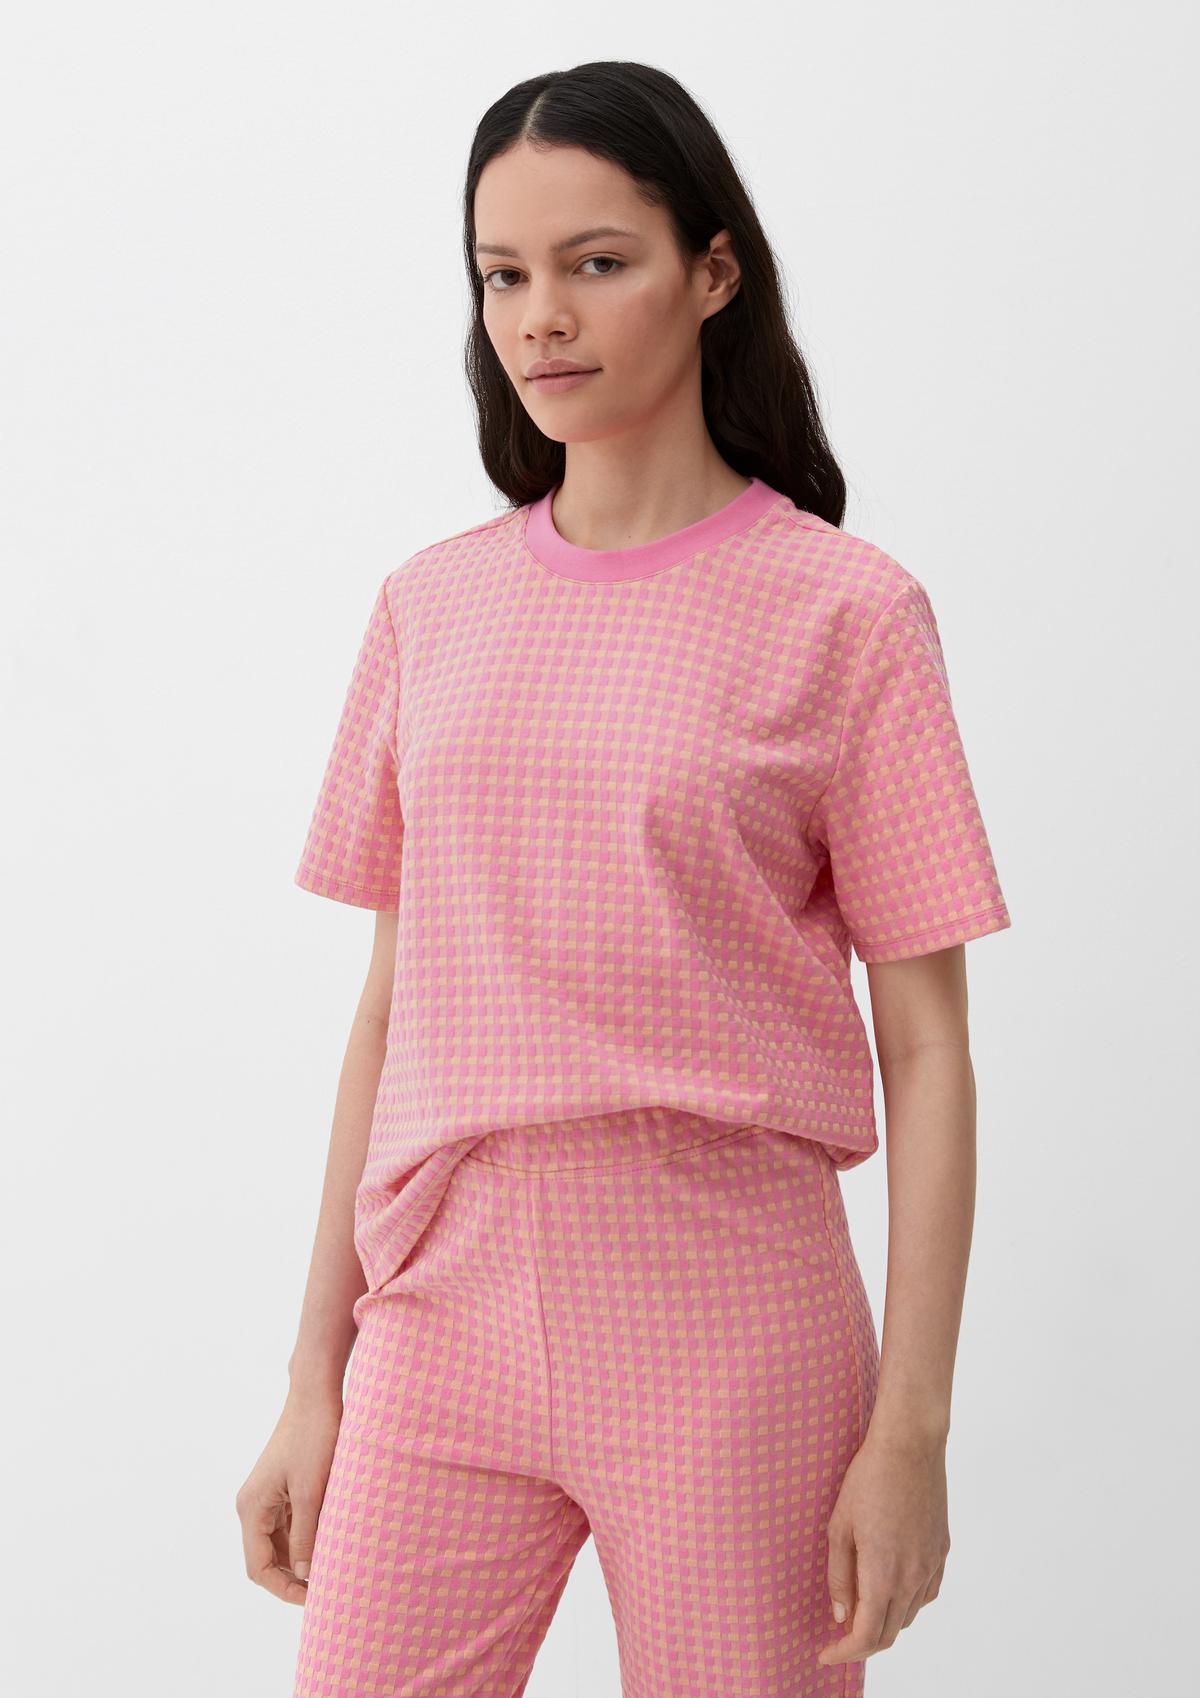 s.Oliver T-shirt with a jacquard texture